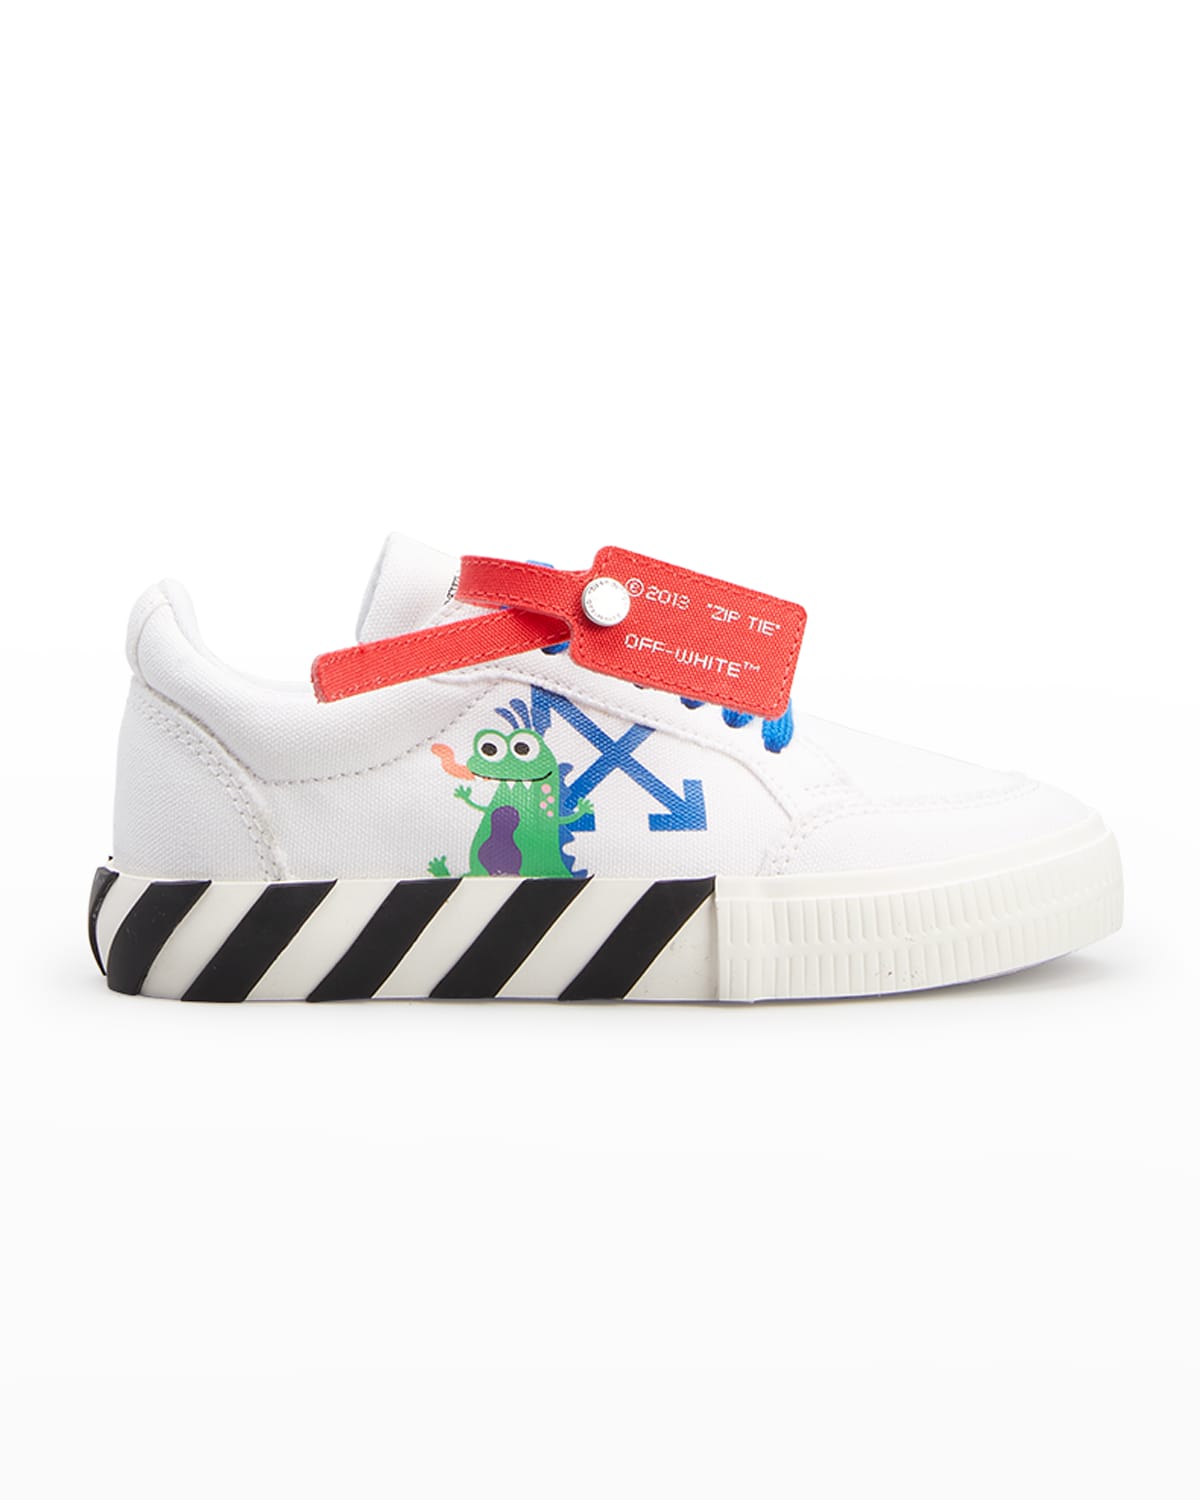 OFF-WHITE Shoes for Kids | ModeSens